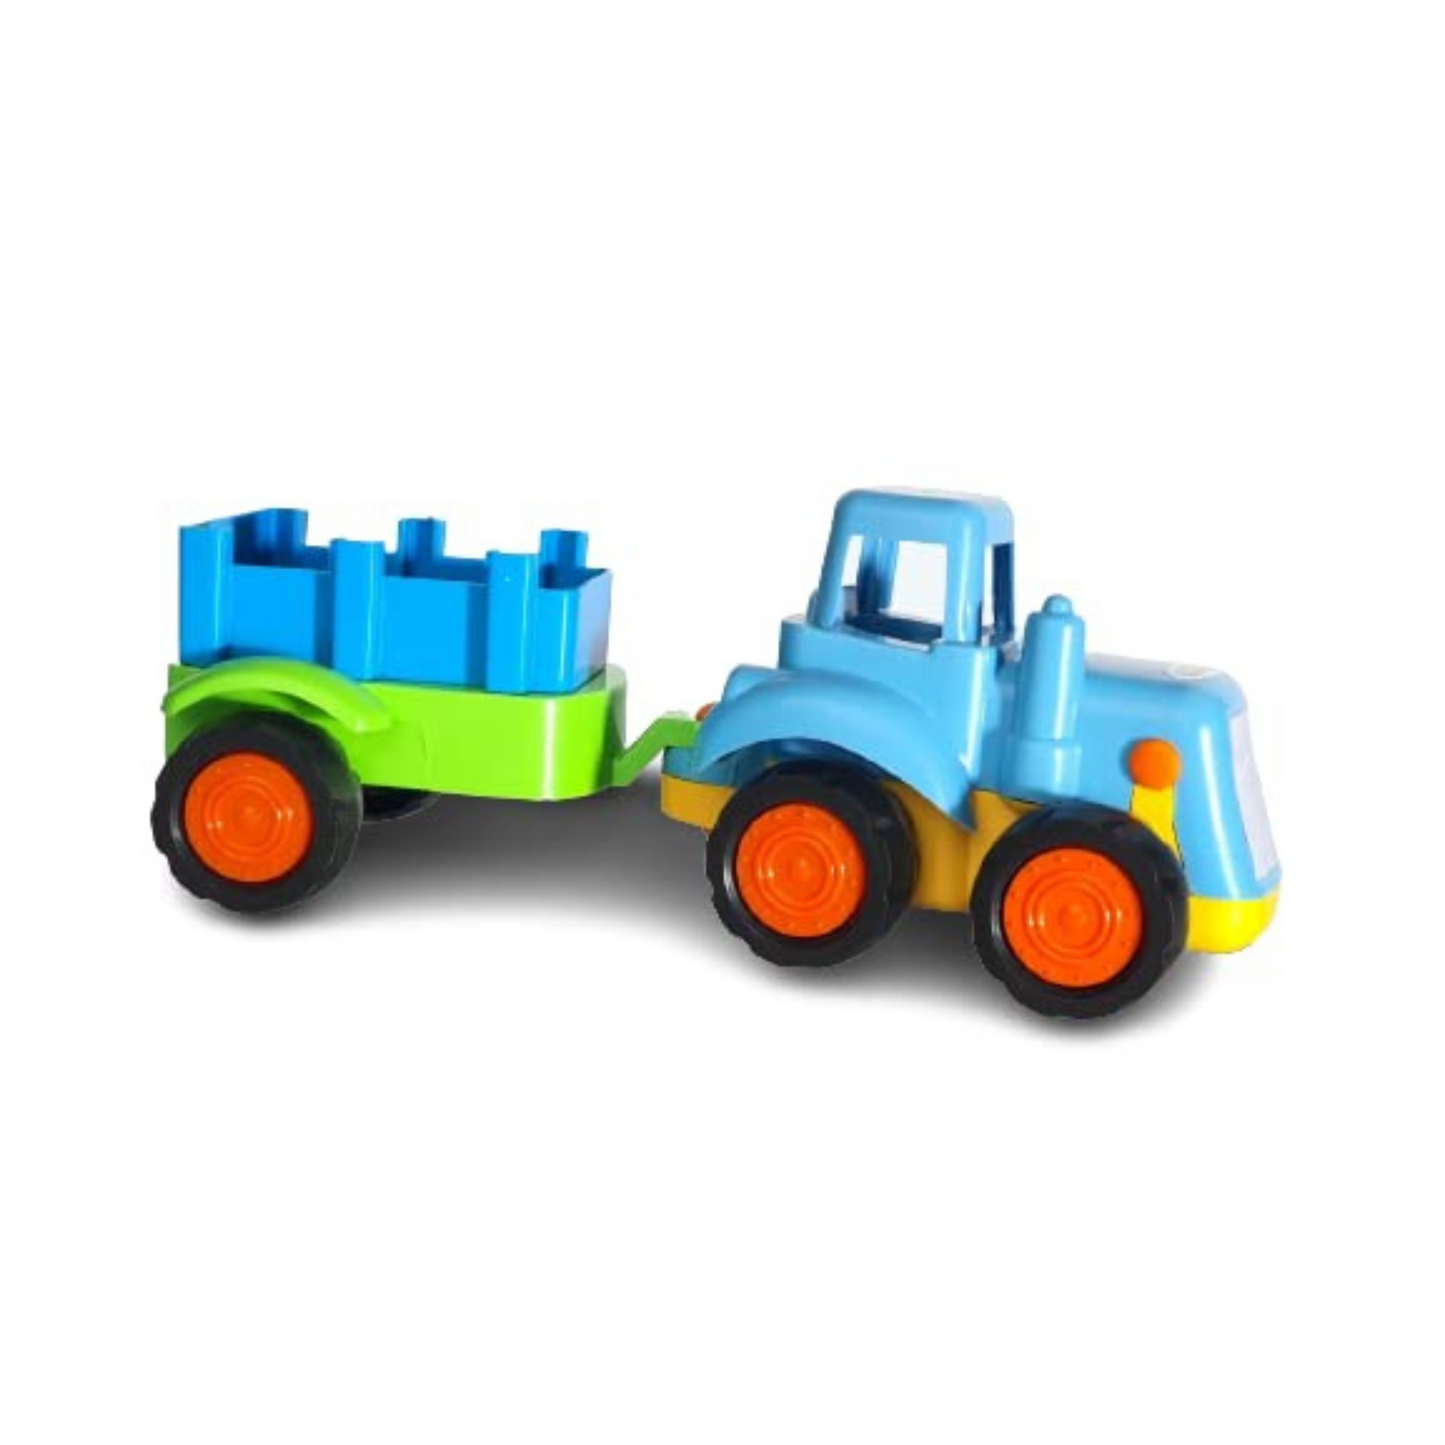 Tractor with Trolly Toy for Kids